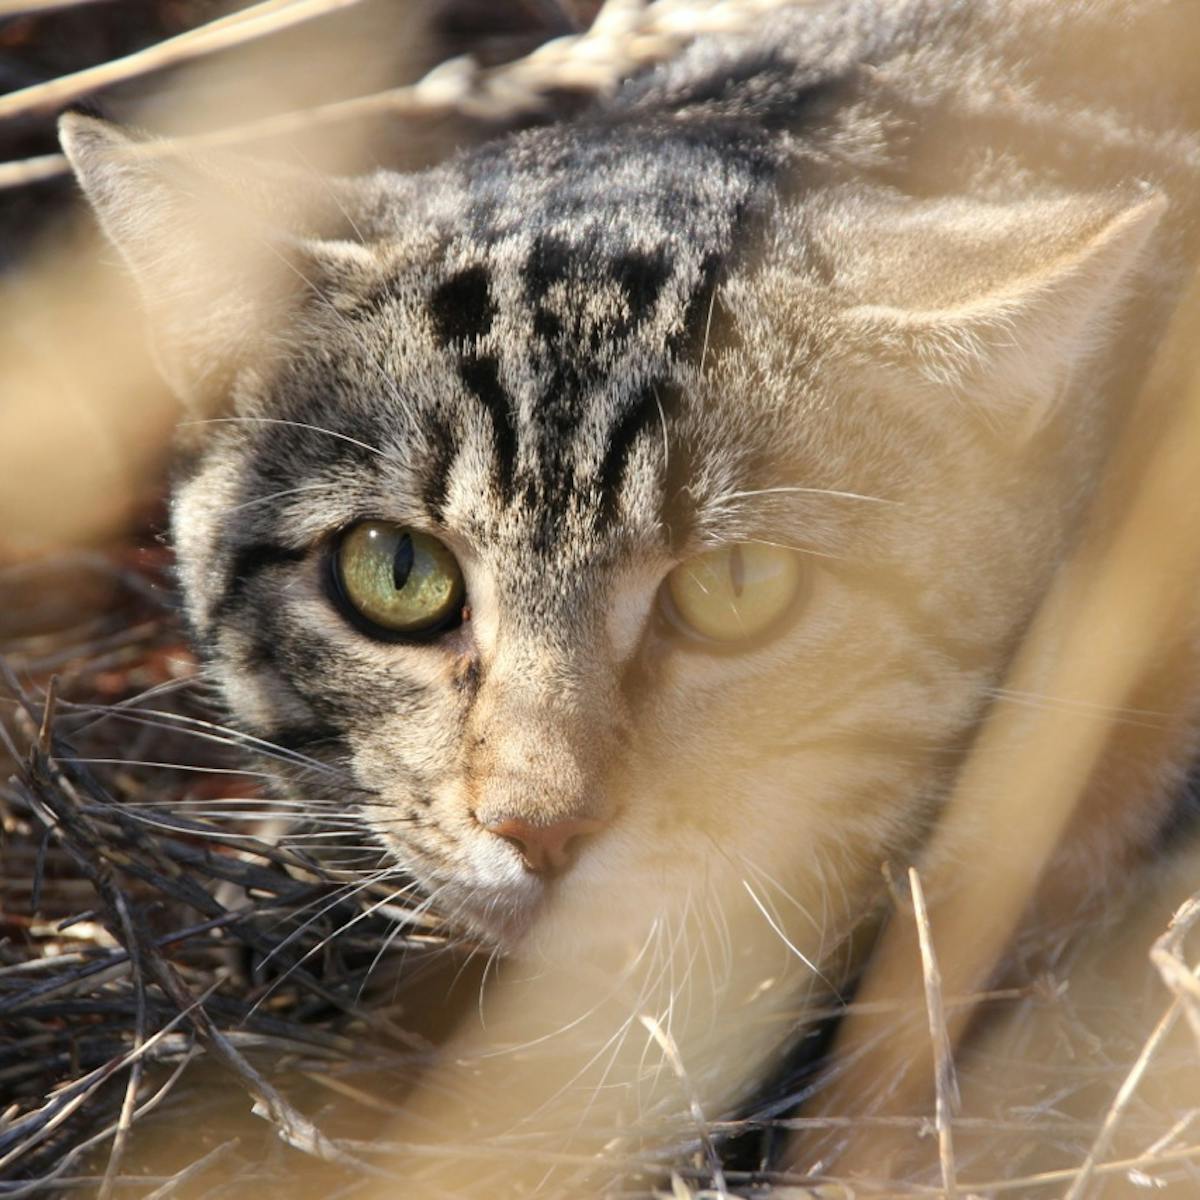 Ferals, strays, pets: how to control the cats that are eating our wildlife